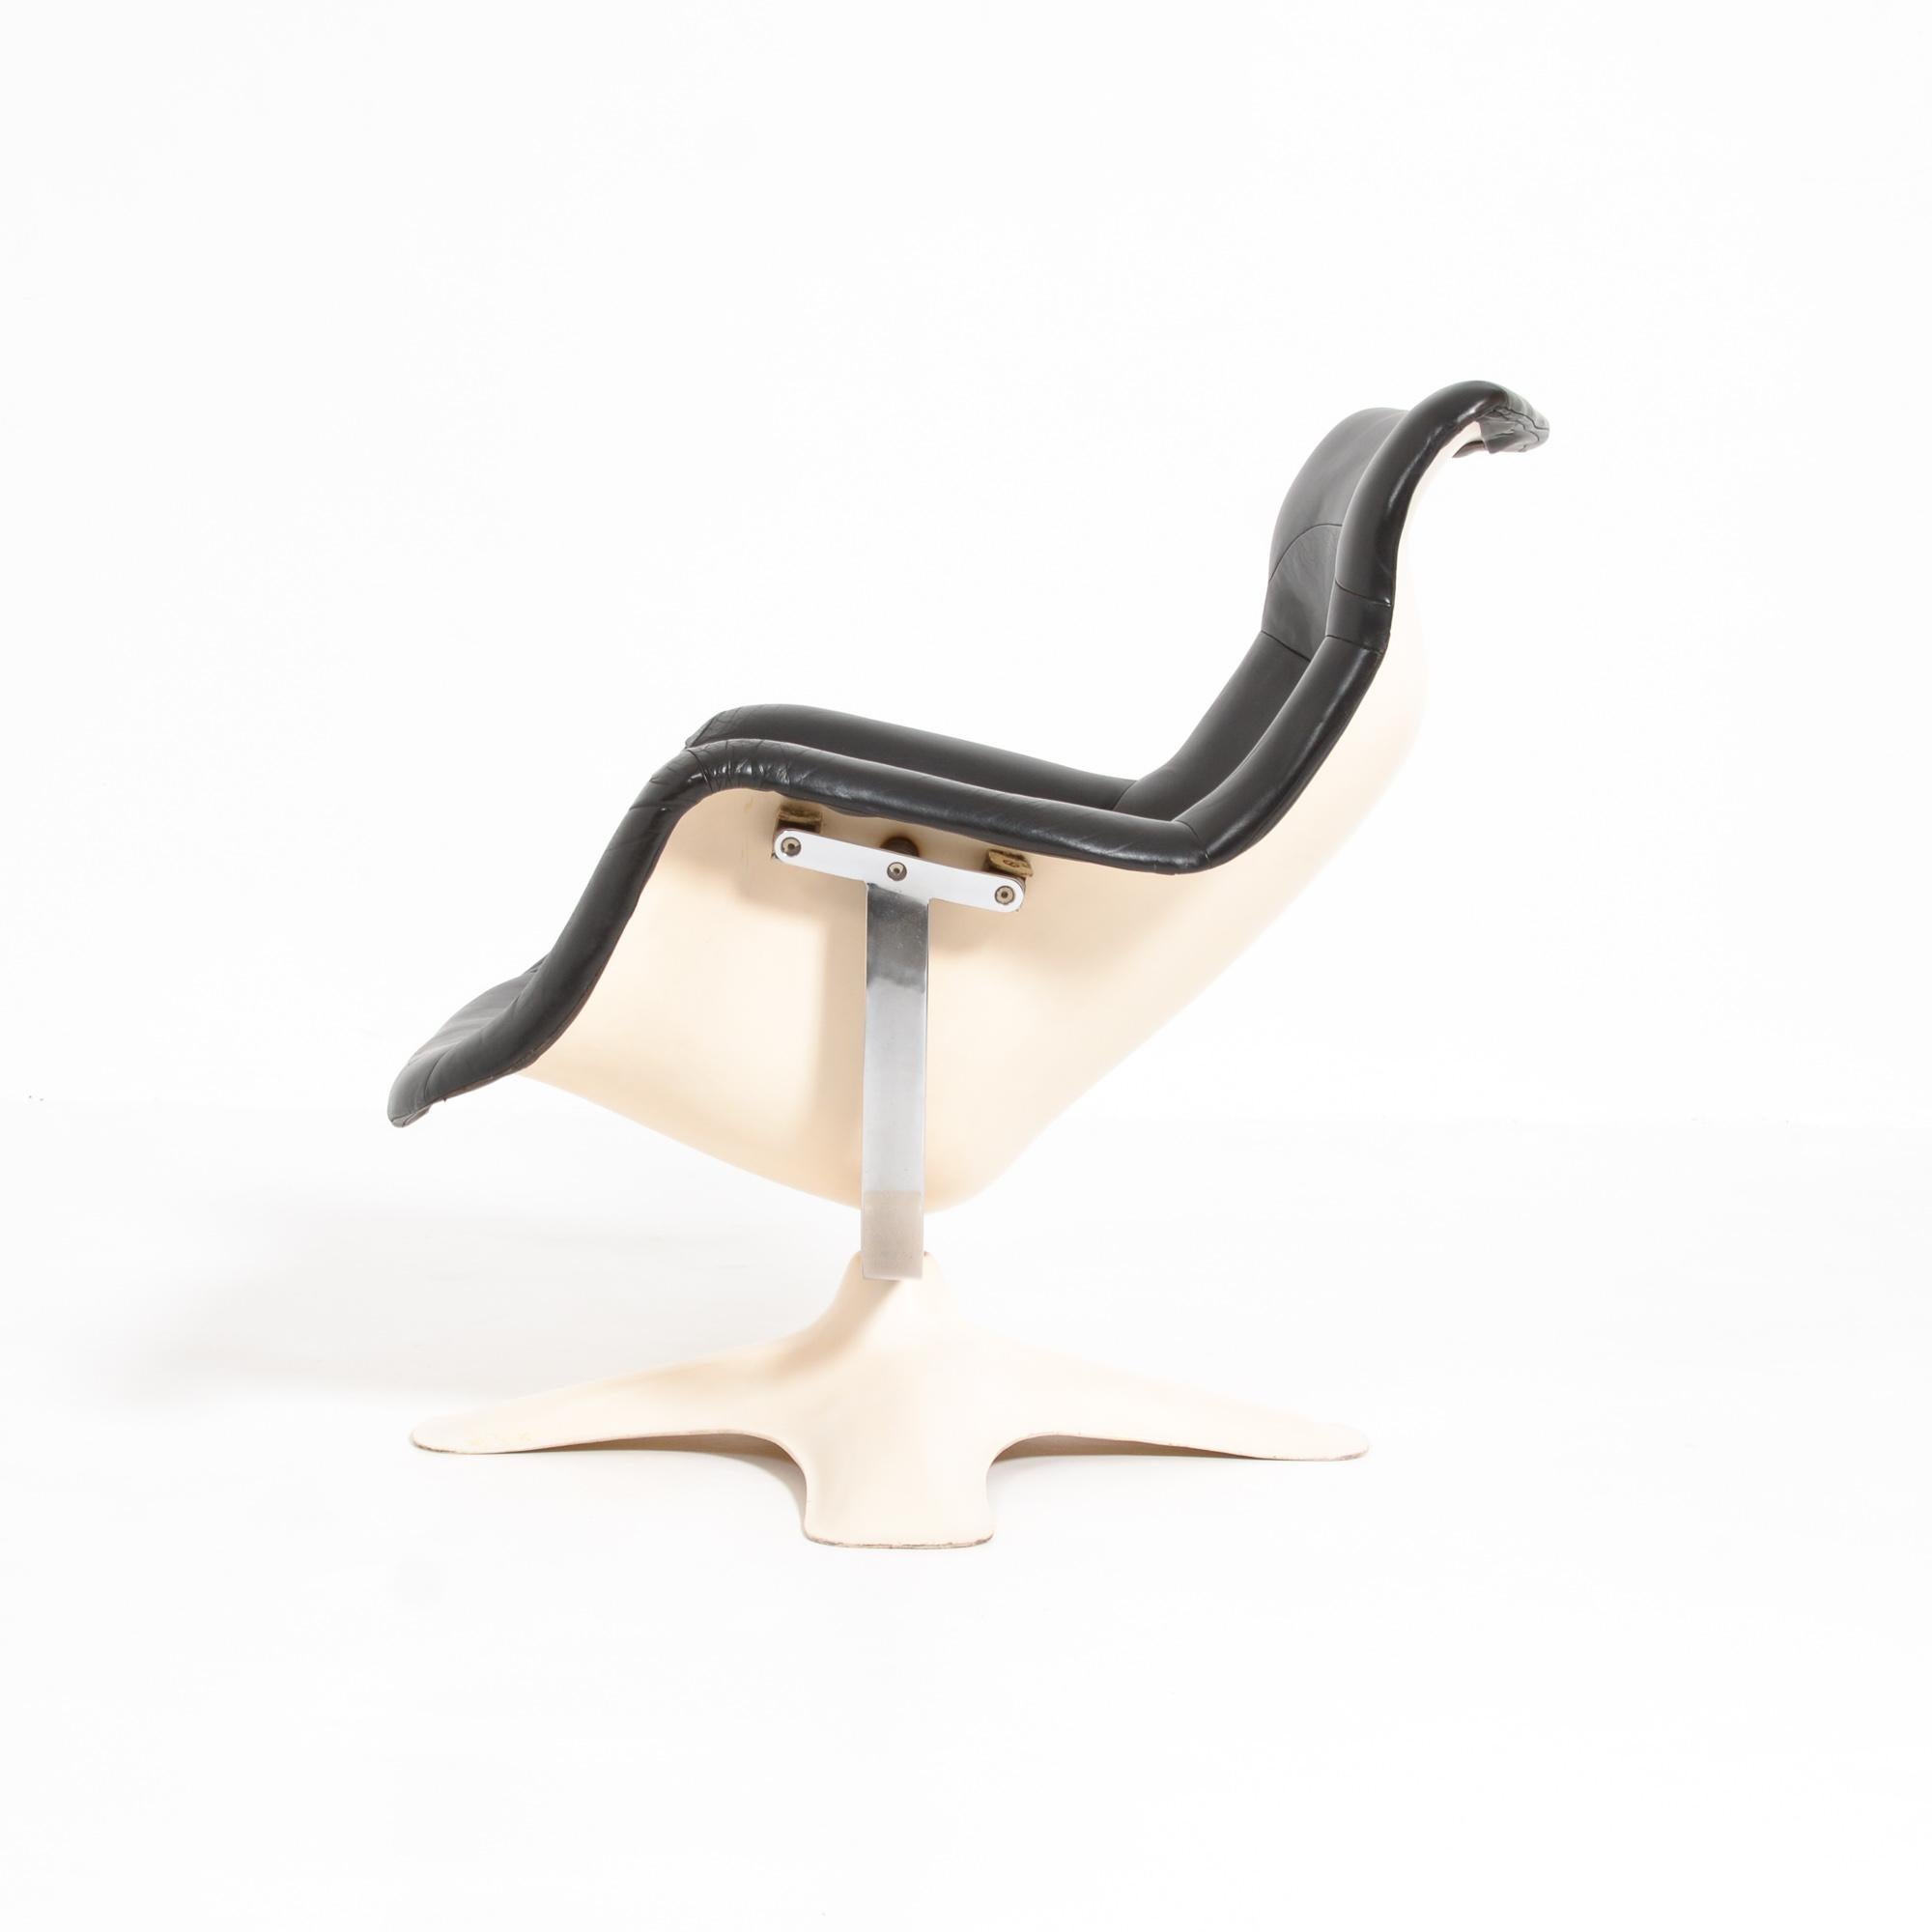 This authentic lounge chair Karuselli was designed by Yrjo Kukkapuro for Haimi, Finland in 1964. This lounge chair is the perfect example of Kukkapuro’s interest in achieving ultimate comfort for the sitter.
The Karuselli Lounge chair is the result